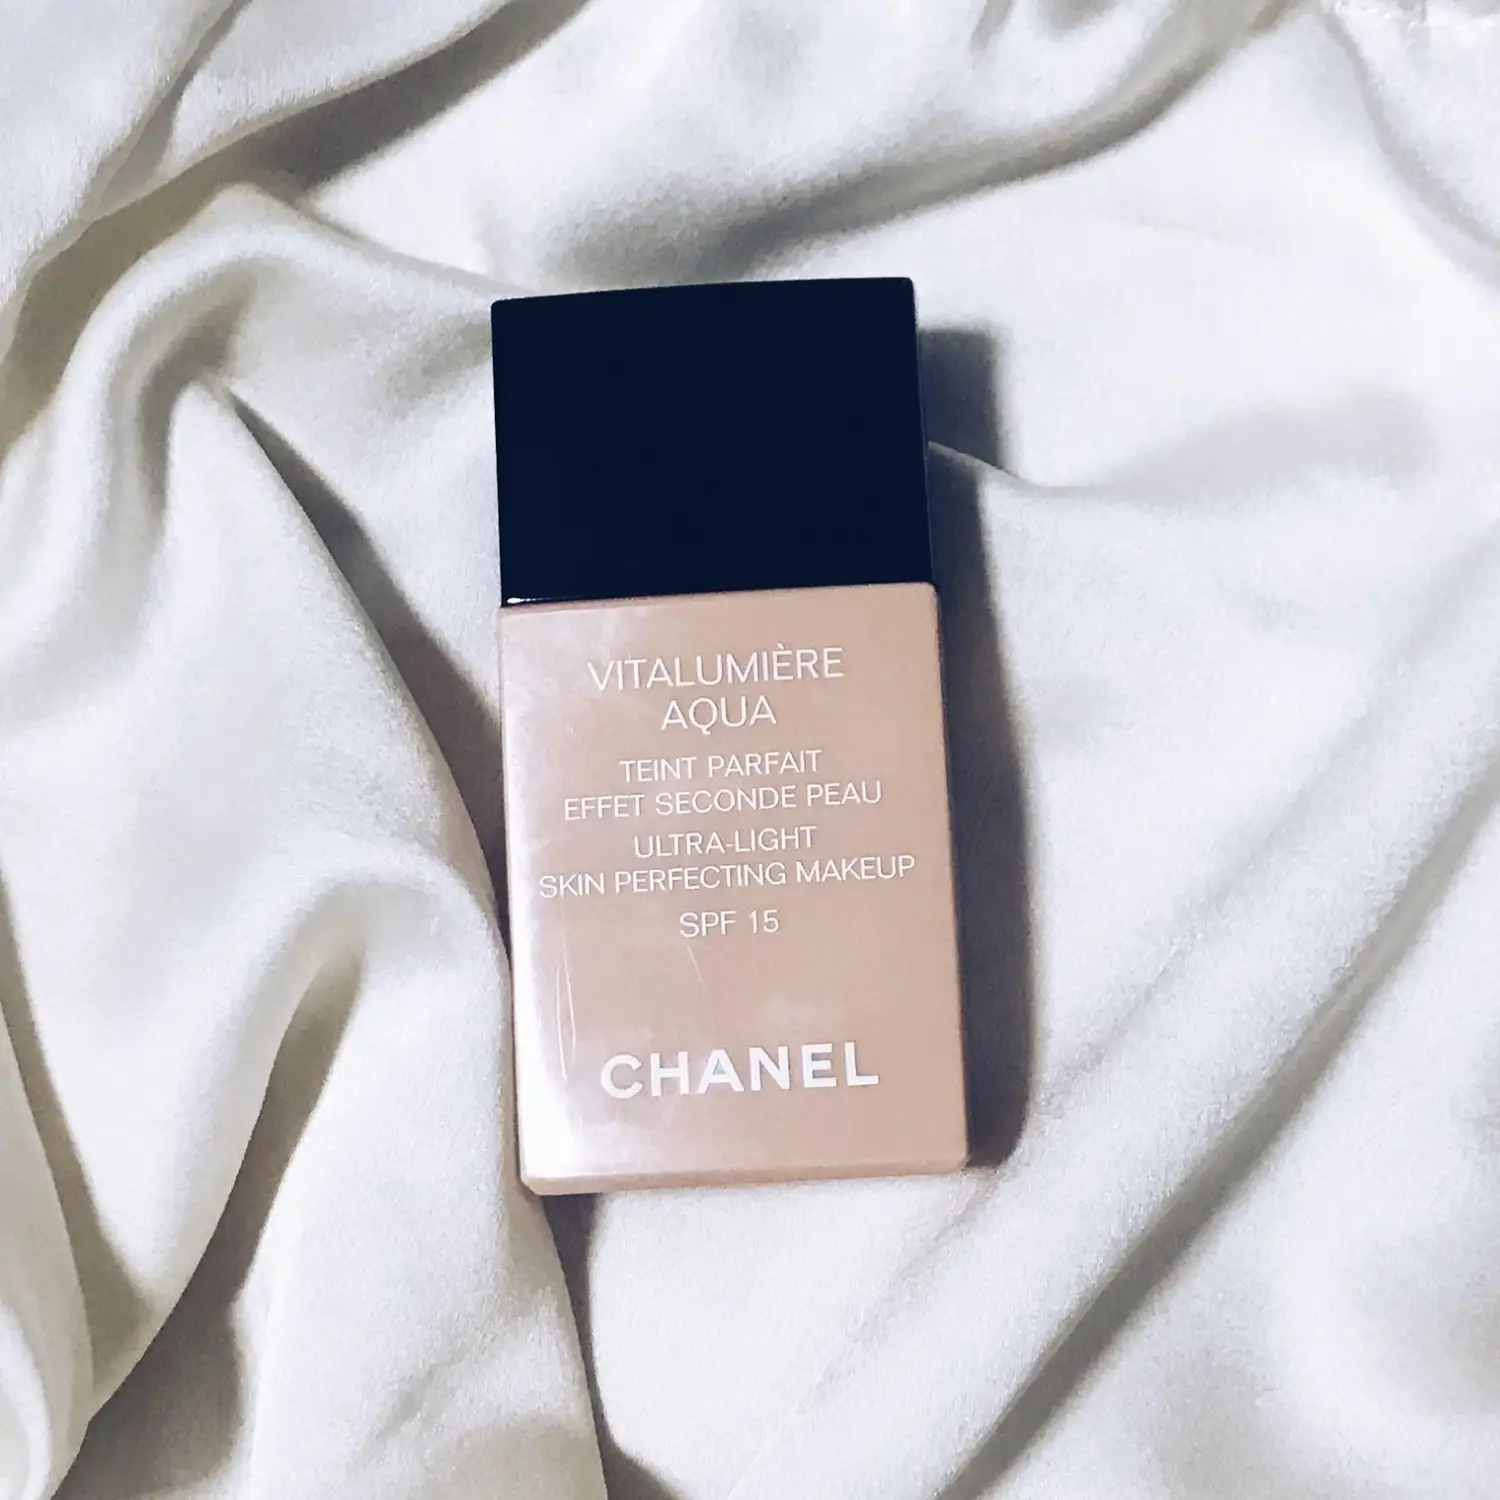 Chanel Vitalumiere Aqua - The only foundation I have had to hunt